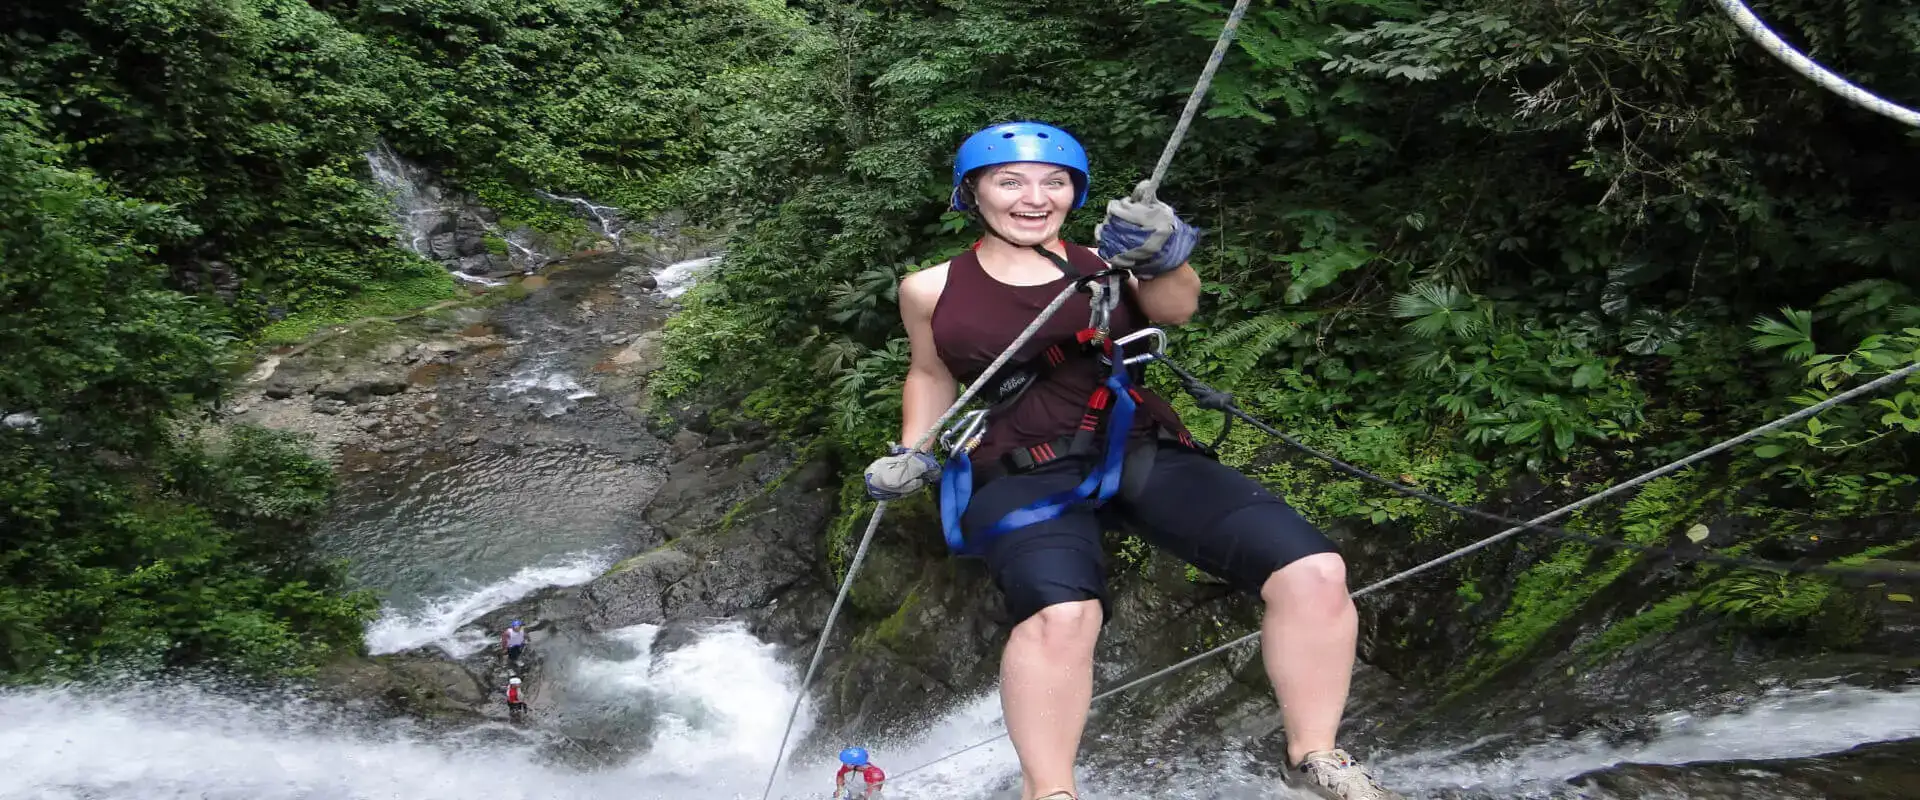 Rappelling and Canyoning Adventure | Costa Rica